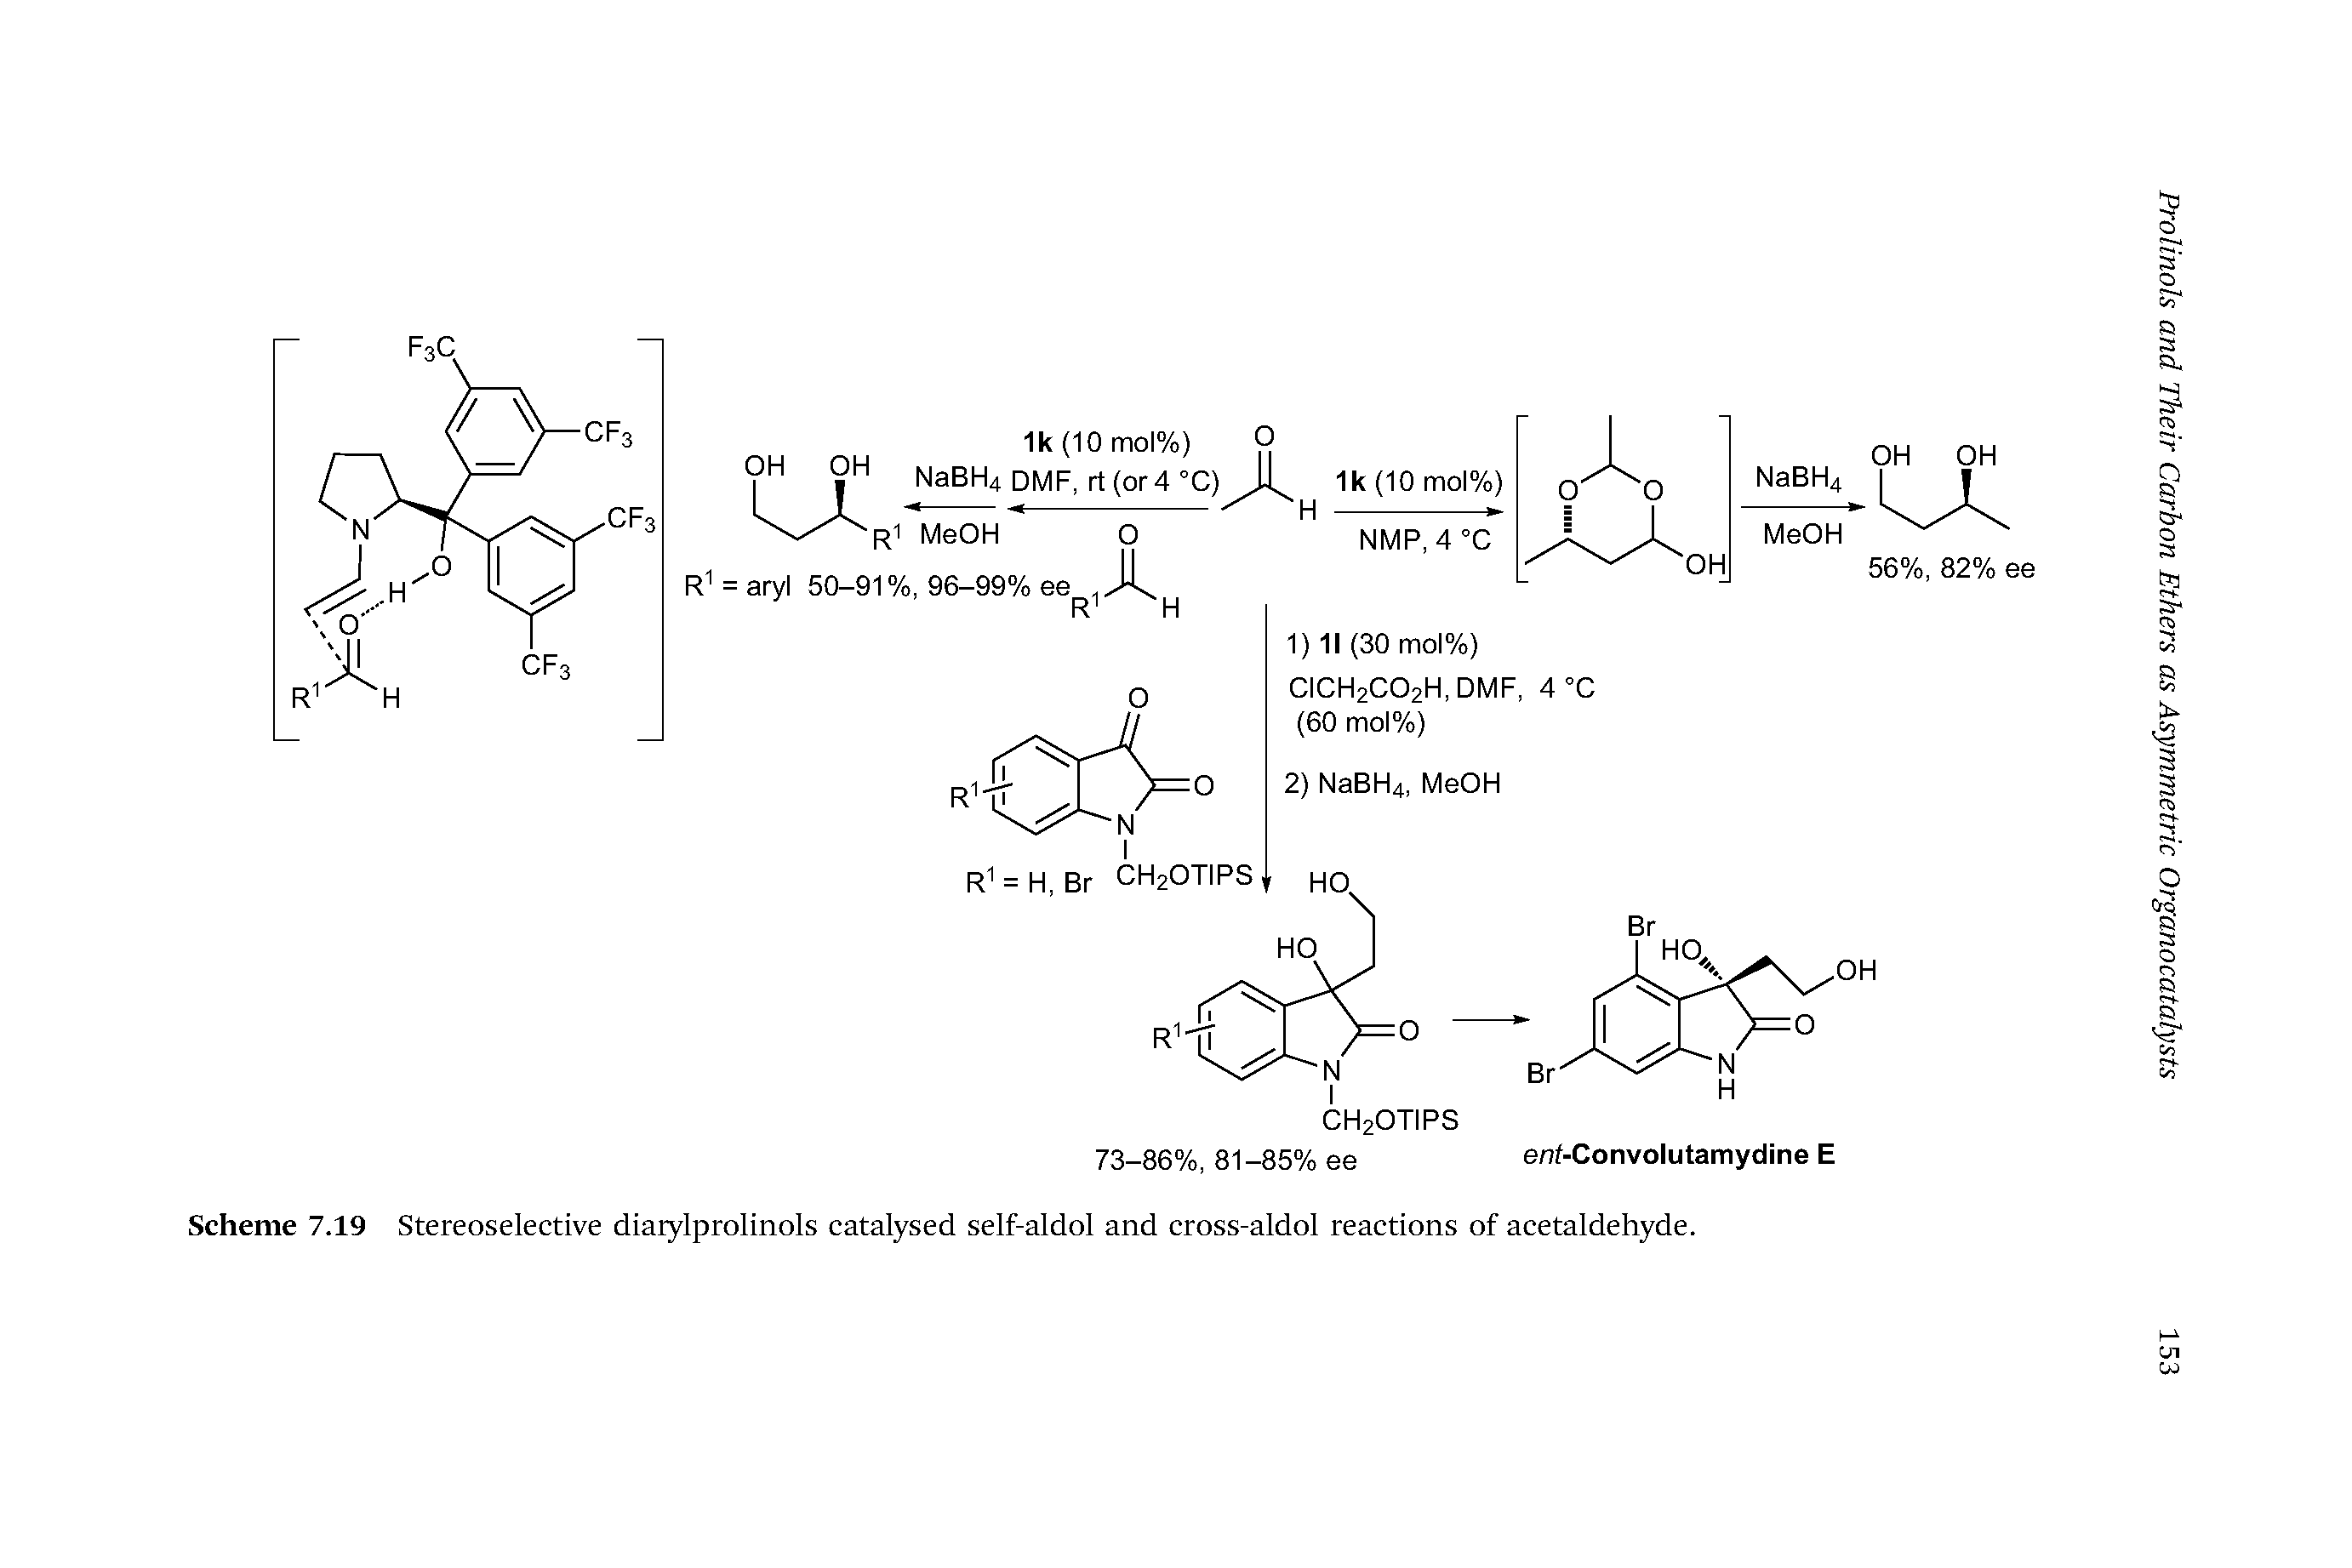 Scheme 7.19 Stereoselective diarylprolinols catalysed self-aldol and cross-aldol reactions of acetaldehyde.